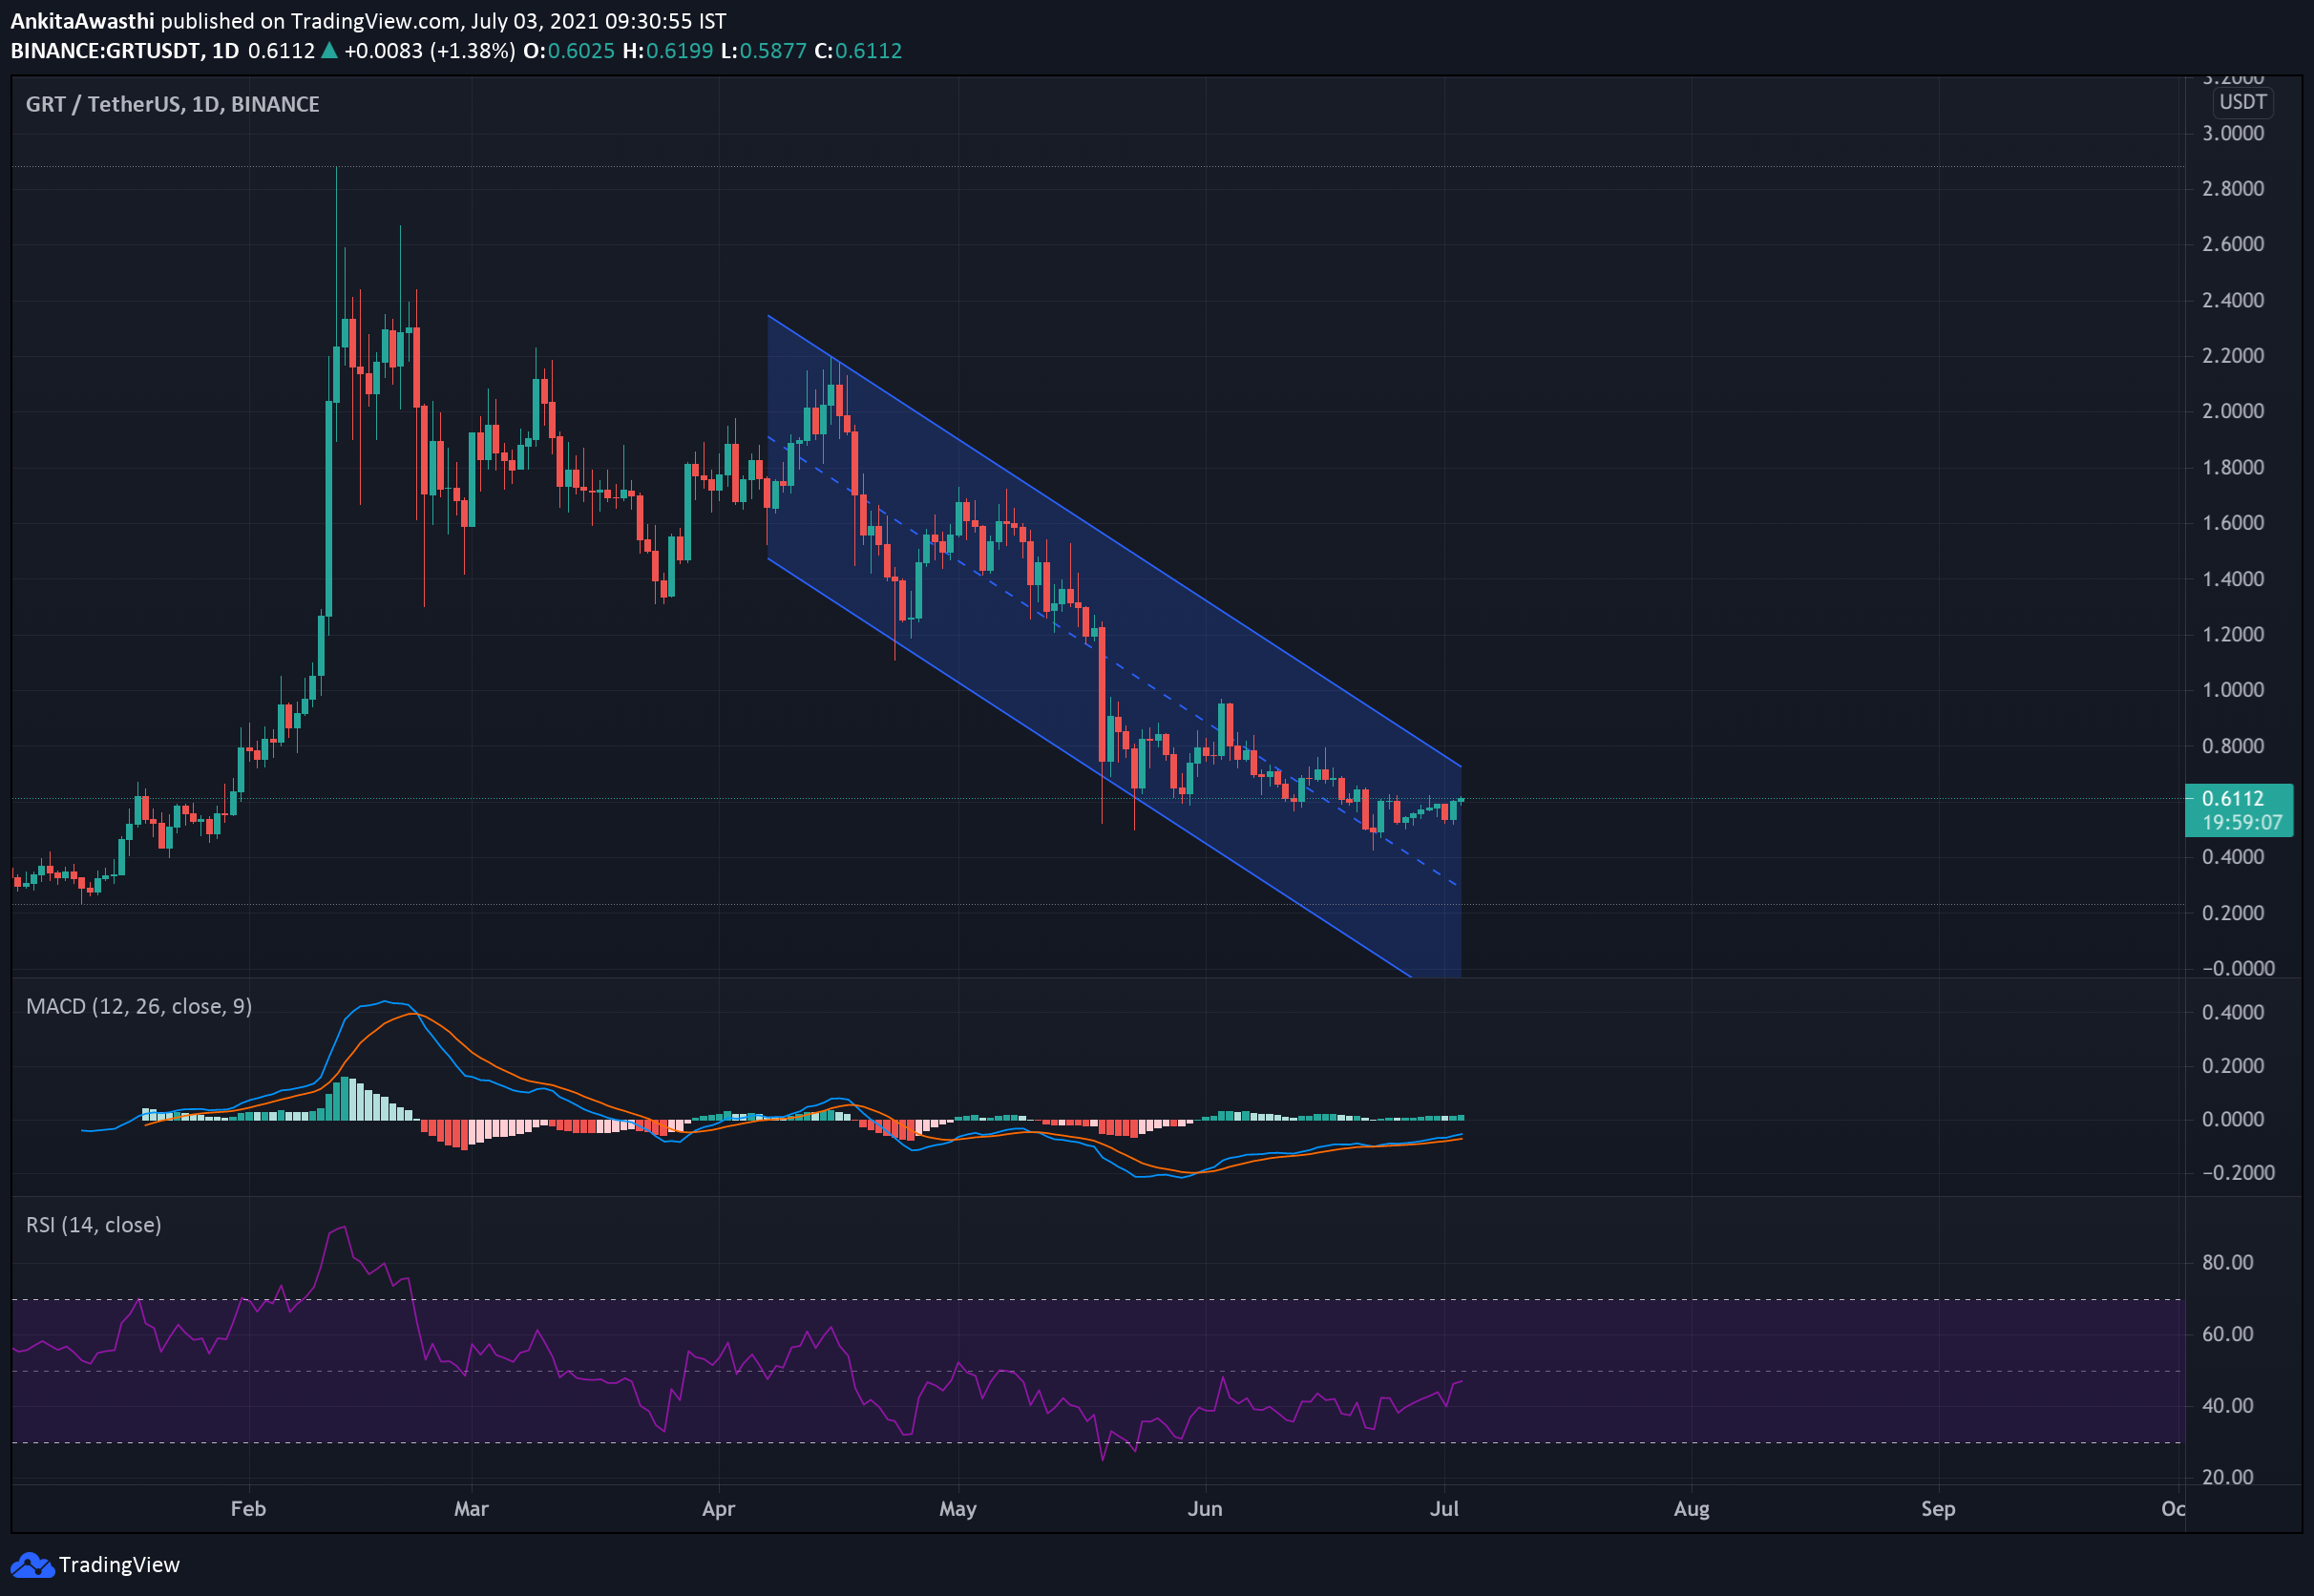 https://platoaistream.com/wp-content/uploads/2021/07/grt-technical-analysis-price-looks-strong-ahead.png